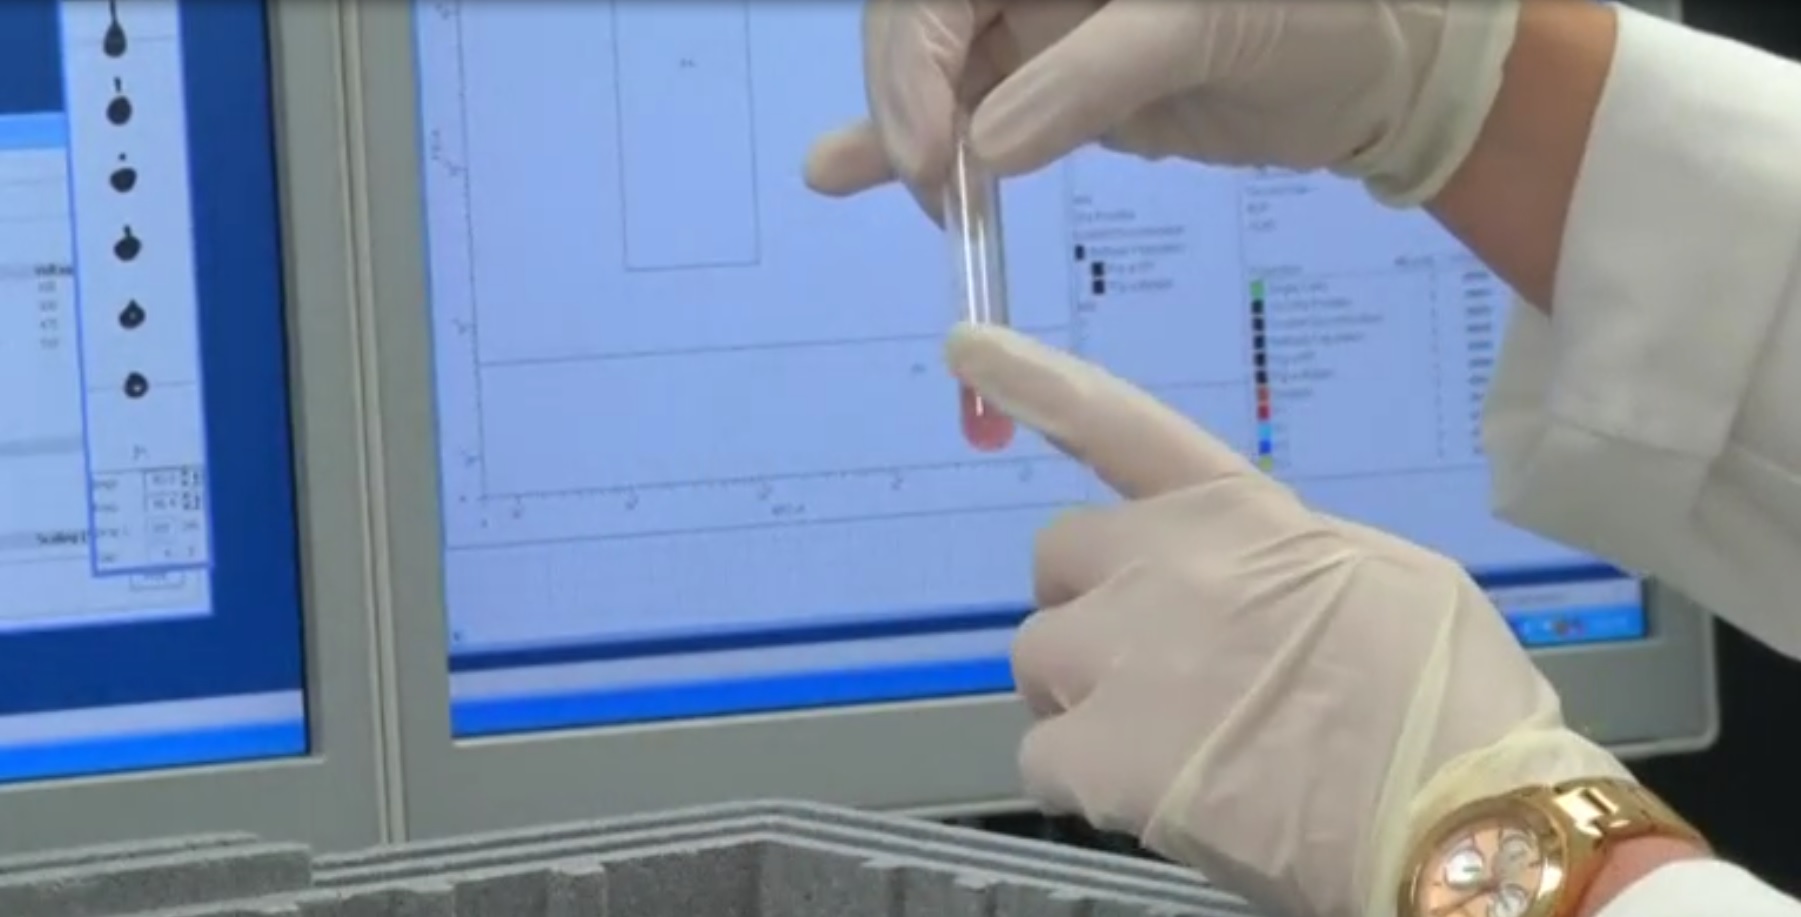 Scientists in Britain hope a simple blood test could one day act as a 'smoke alarm' for early detection of cancer by spotting mutated blood cells that could indicate the disease at a very early stage. (Photo grabbed from Reuters video)